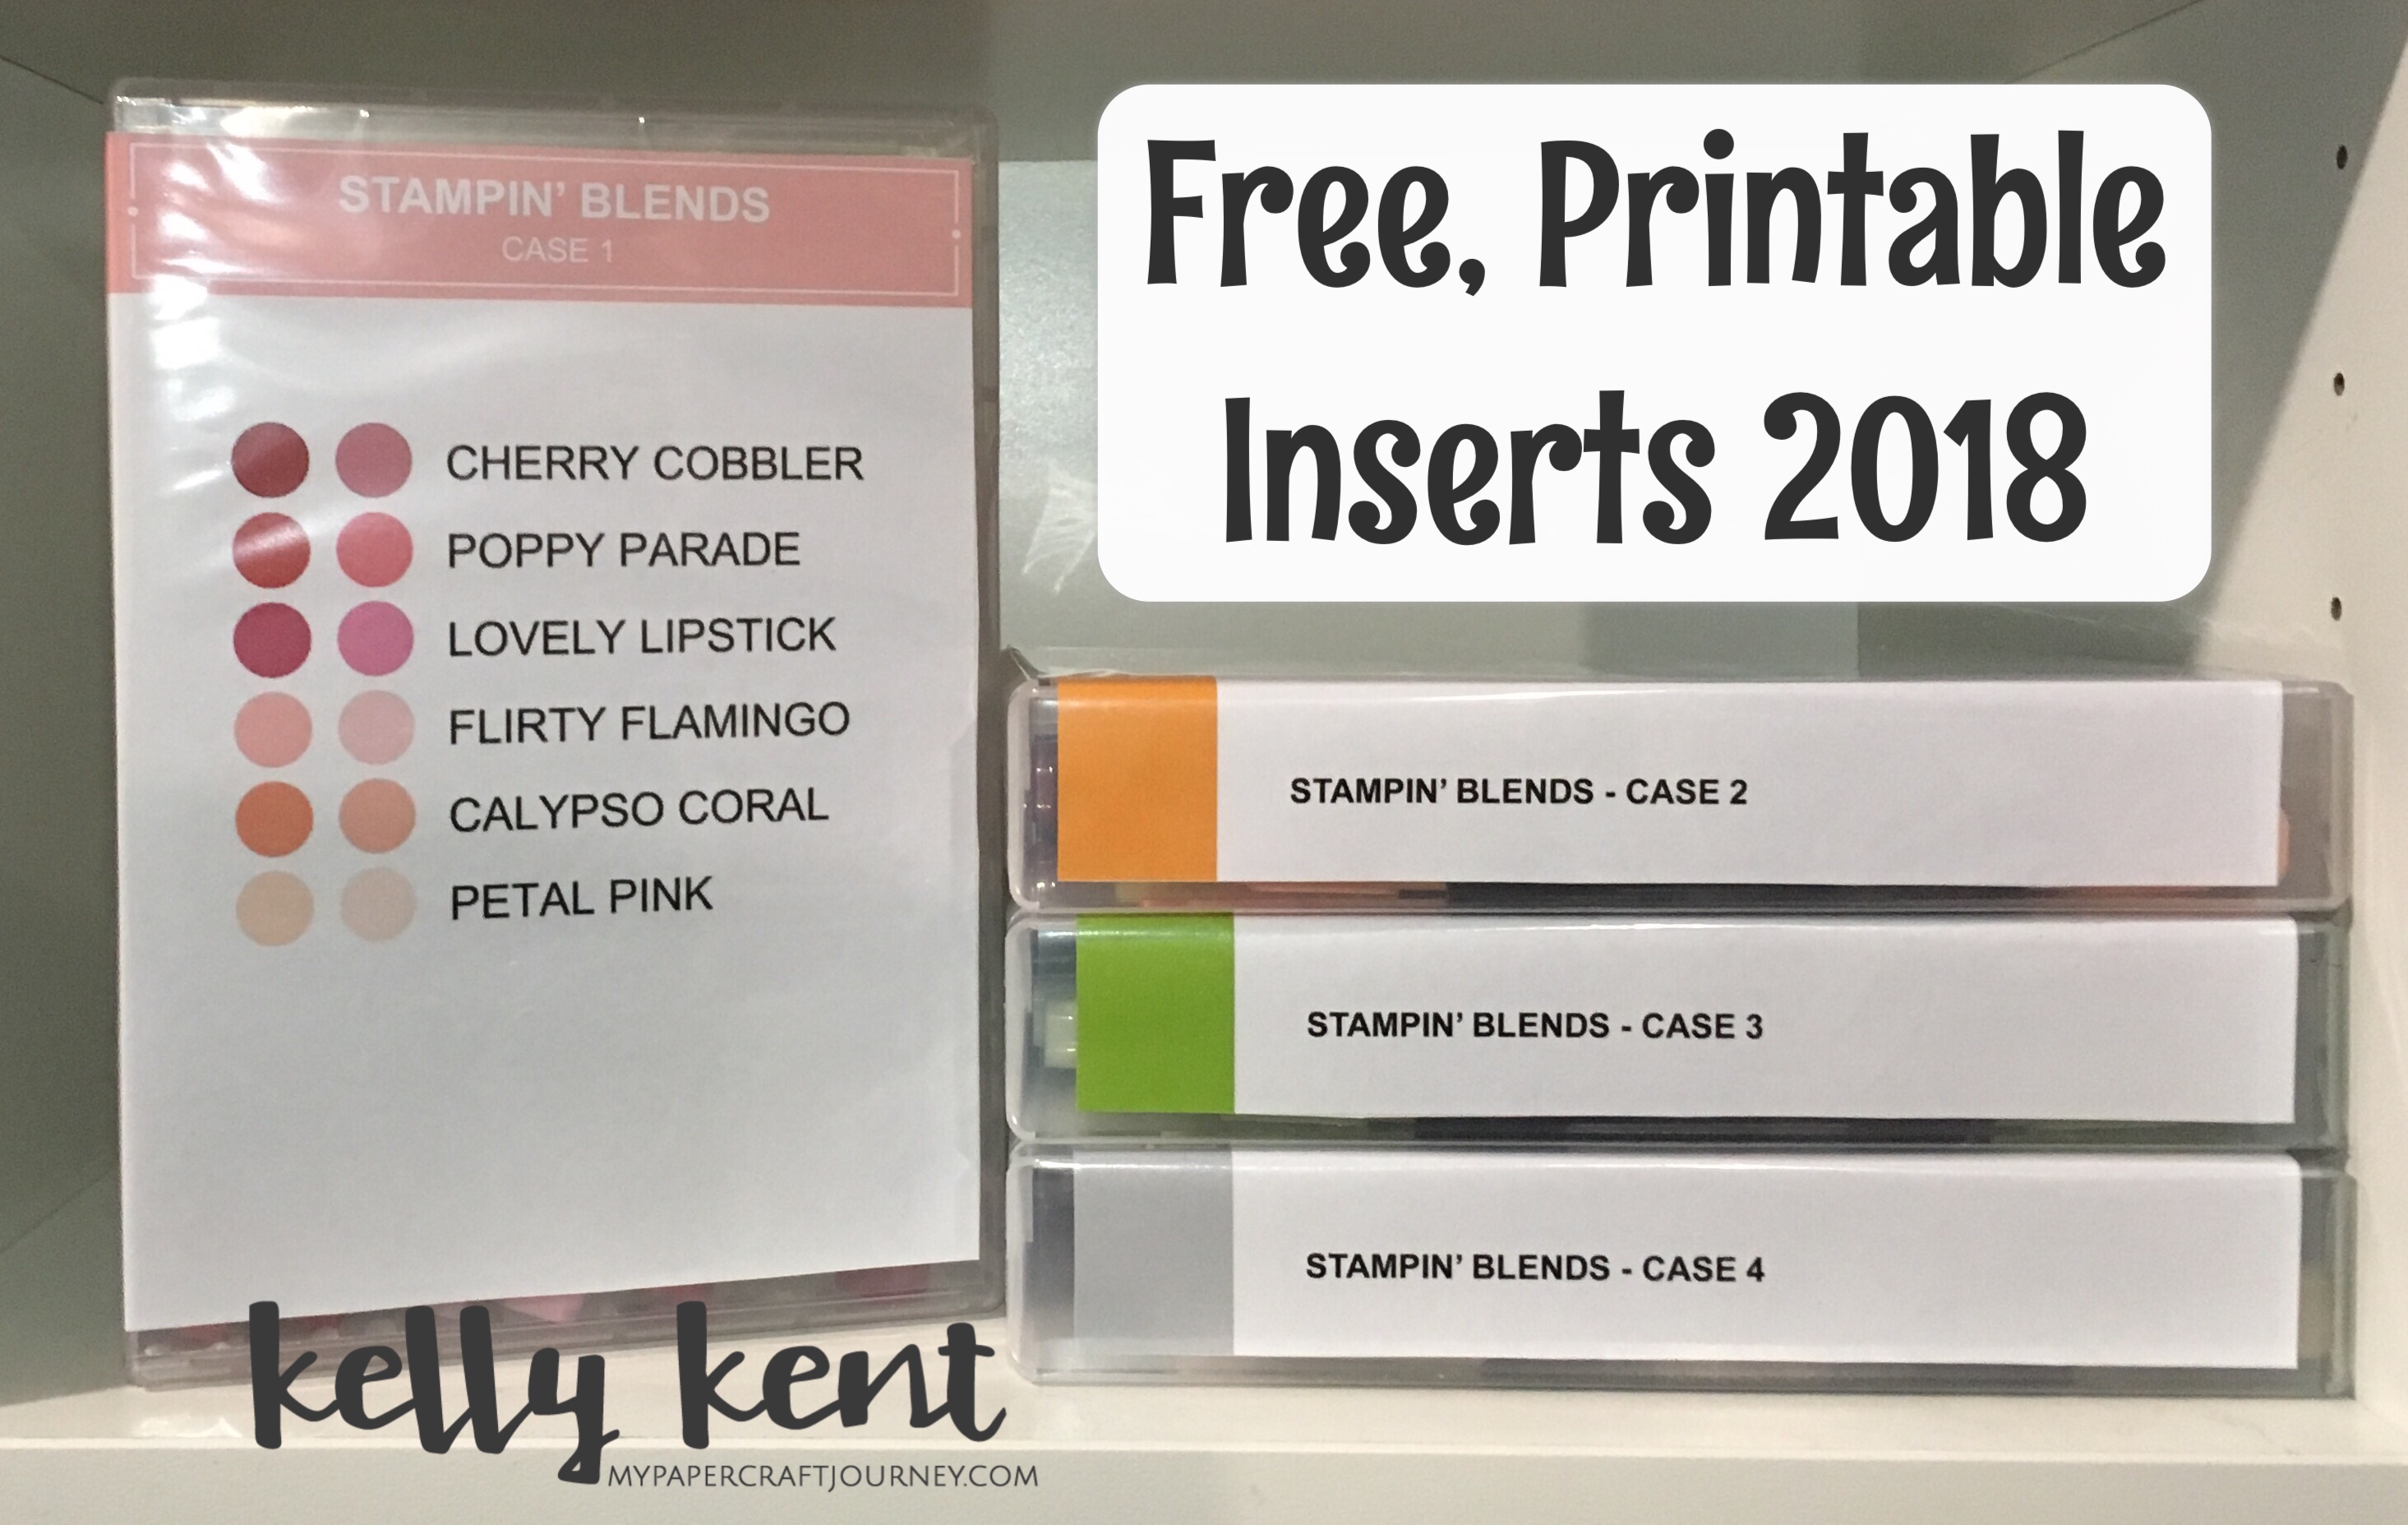 Free Printable Inserts for Stampin' Blends | kelly kent